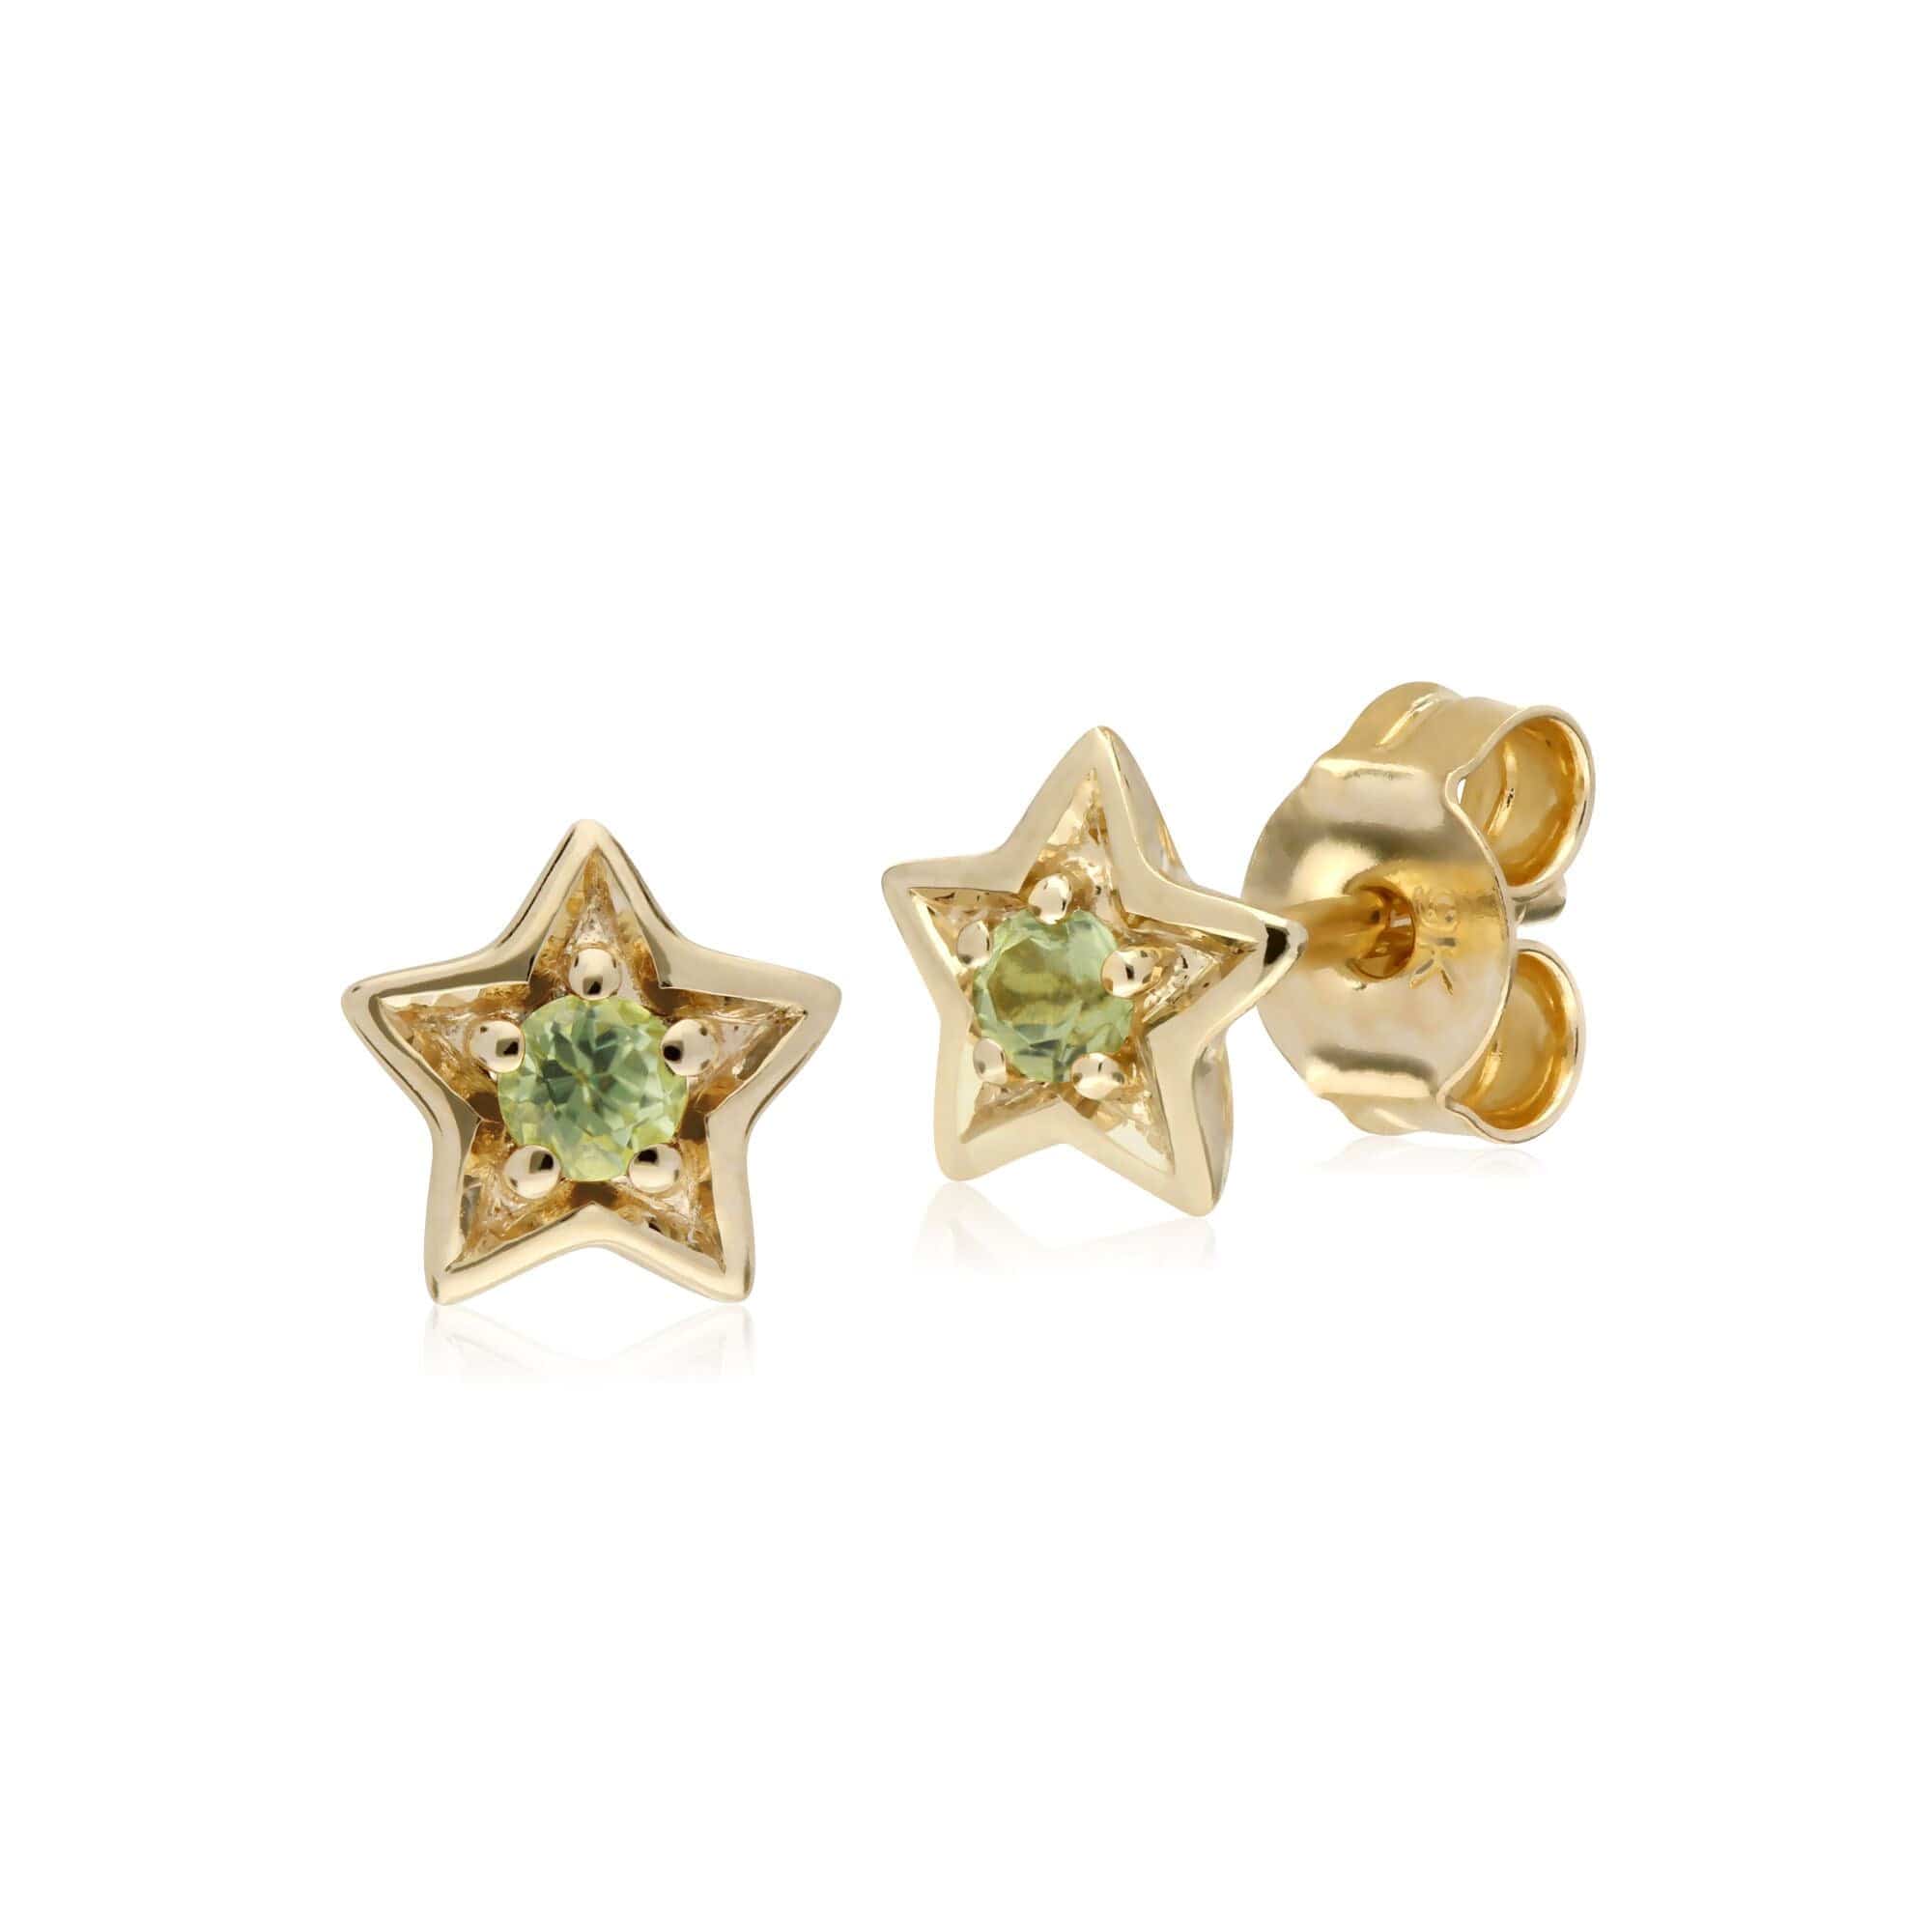 135E1523069-135P1874069 Contemporary Round Peridot Single Stone Star Earrings & Necklace Set in 9ct Yellow Gold 2